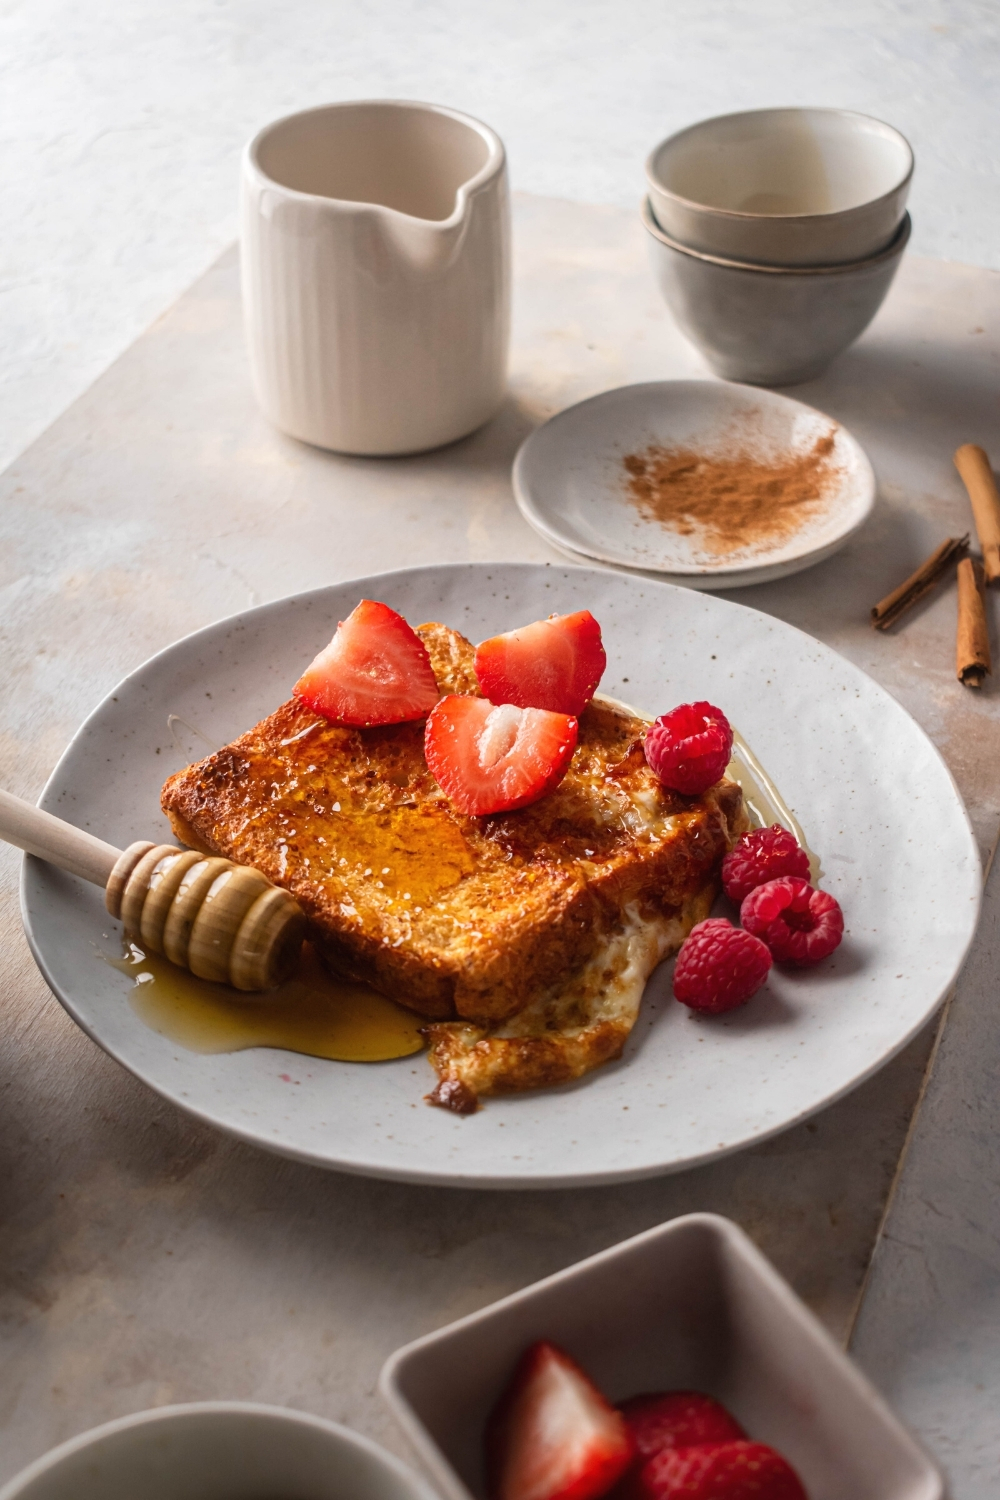 A white plate with a piece of French toast on it. There are some raspberries next to the French toast and some sliced strawberries on top. Behind it is a small white plate with cinnamon on it, a white pitcher, and two small white bowls stacked on top of each other.